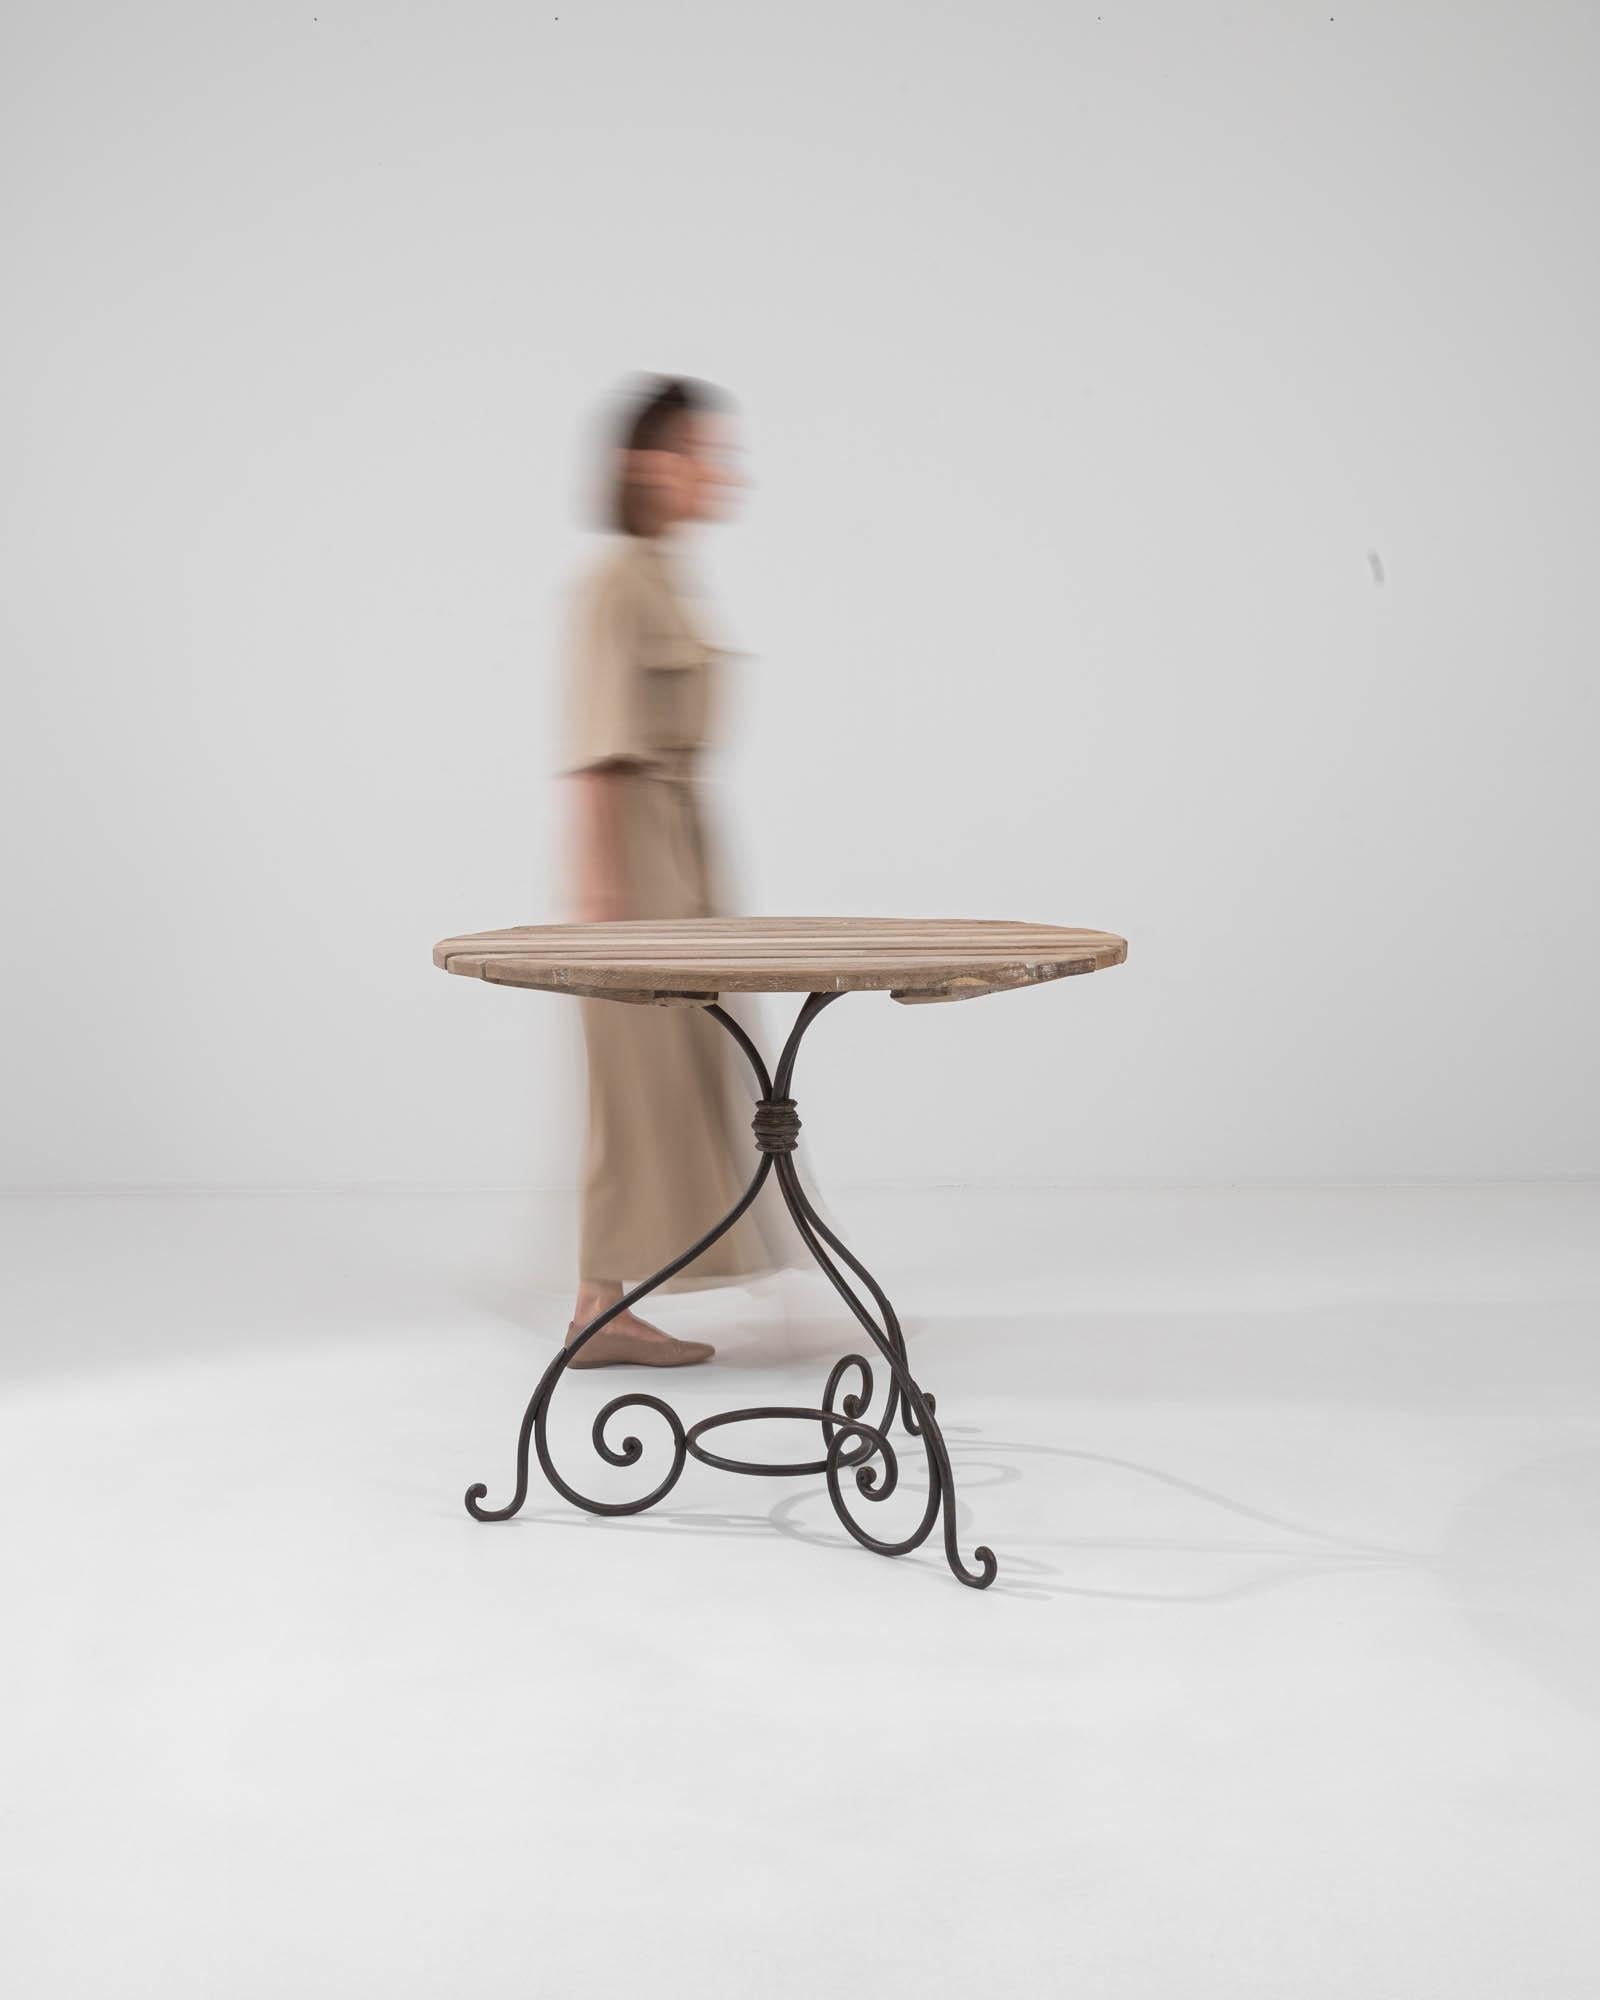 Discover the perfect blend of rustic charm and industrial flair with this 1900s French Metal Table, boasting a genuine wooden top. The circular tabletop, with its warm wood tones and visible grain, sits atop an elegantly crafted metal base whose